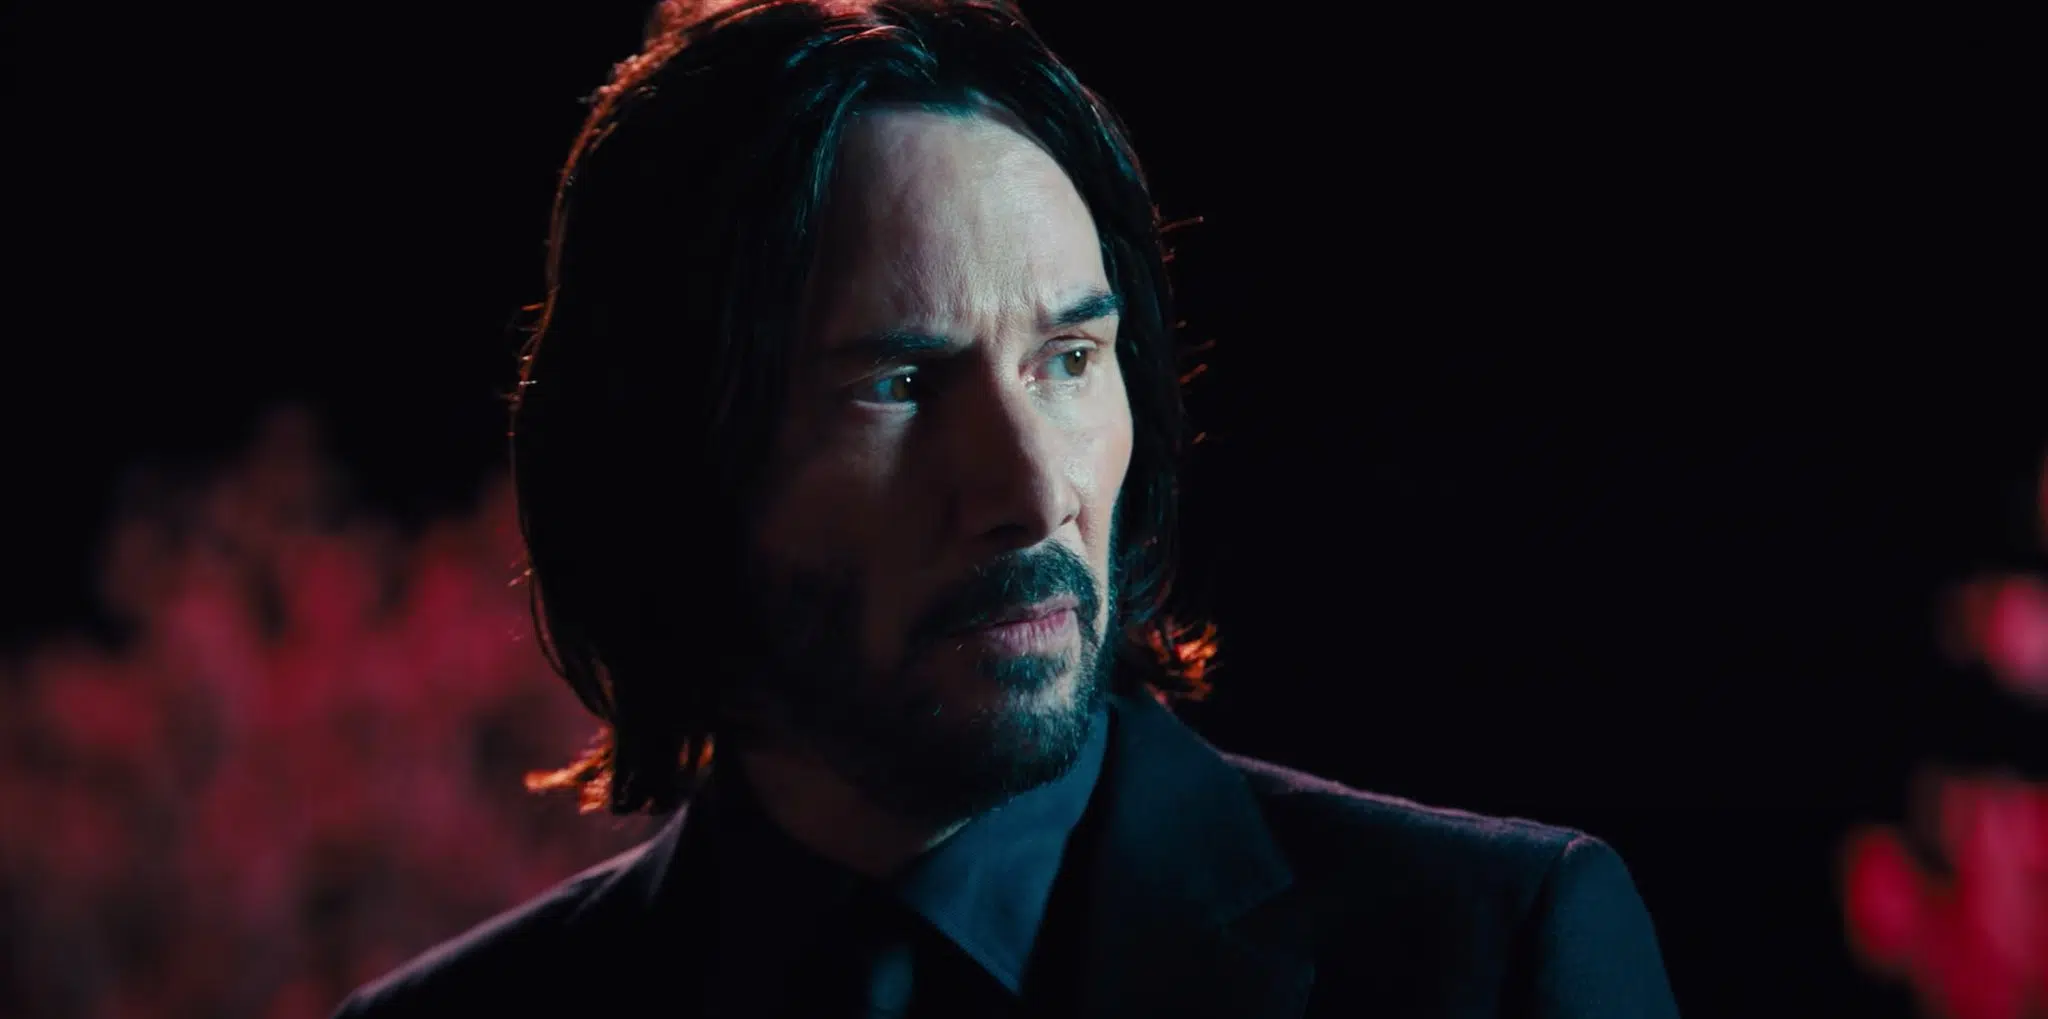 [WATCH] Keanu Reeves Explains The First Three John Wick Movies In 60 Seconds